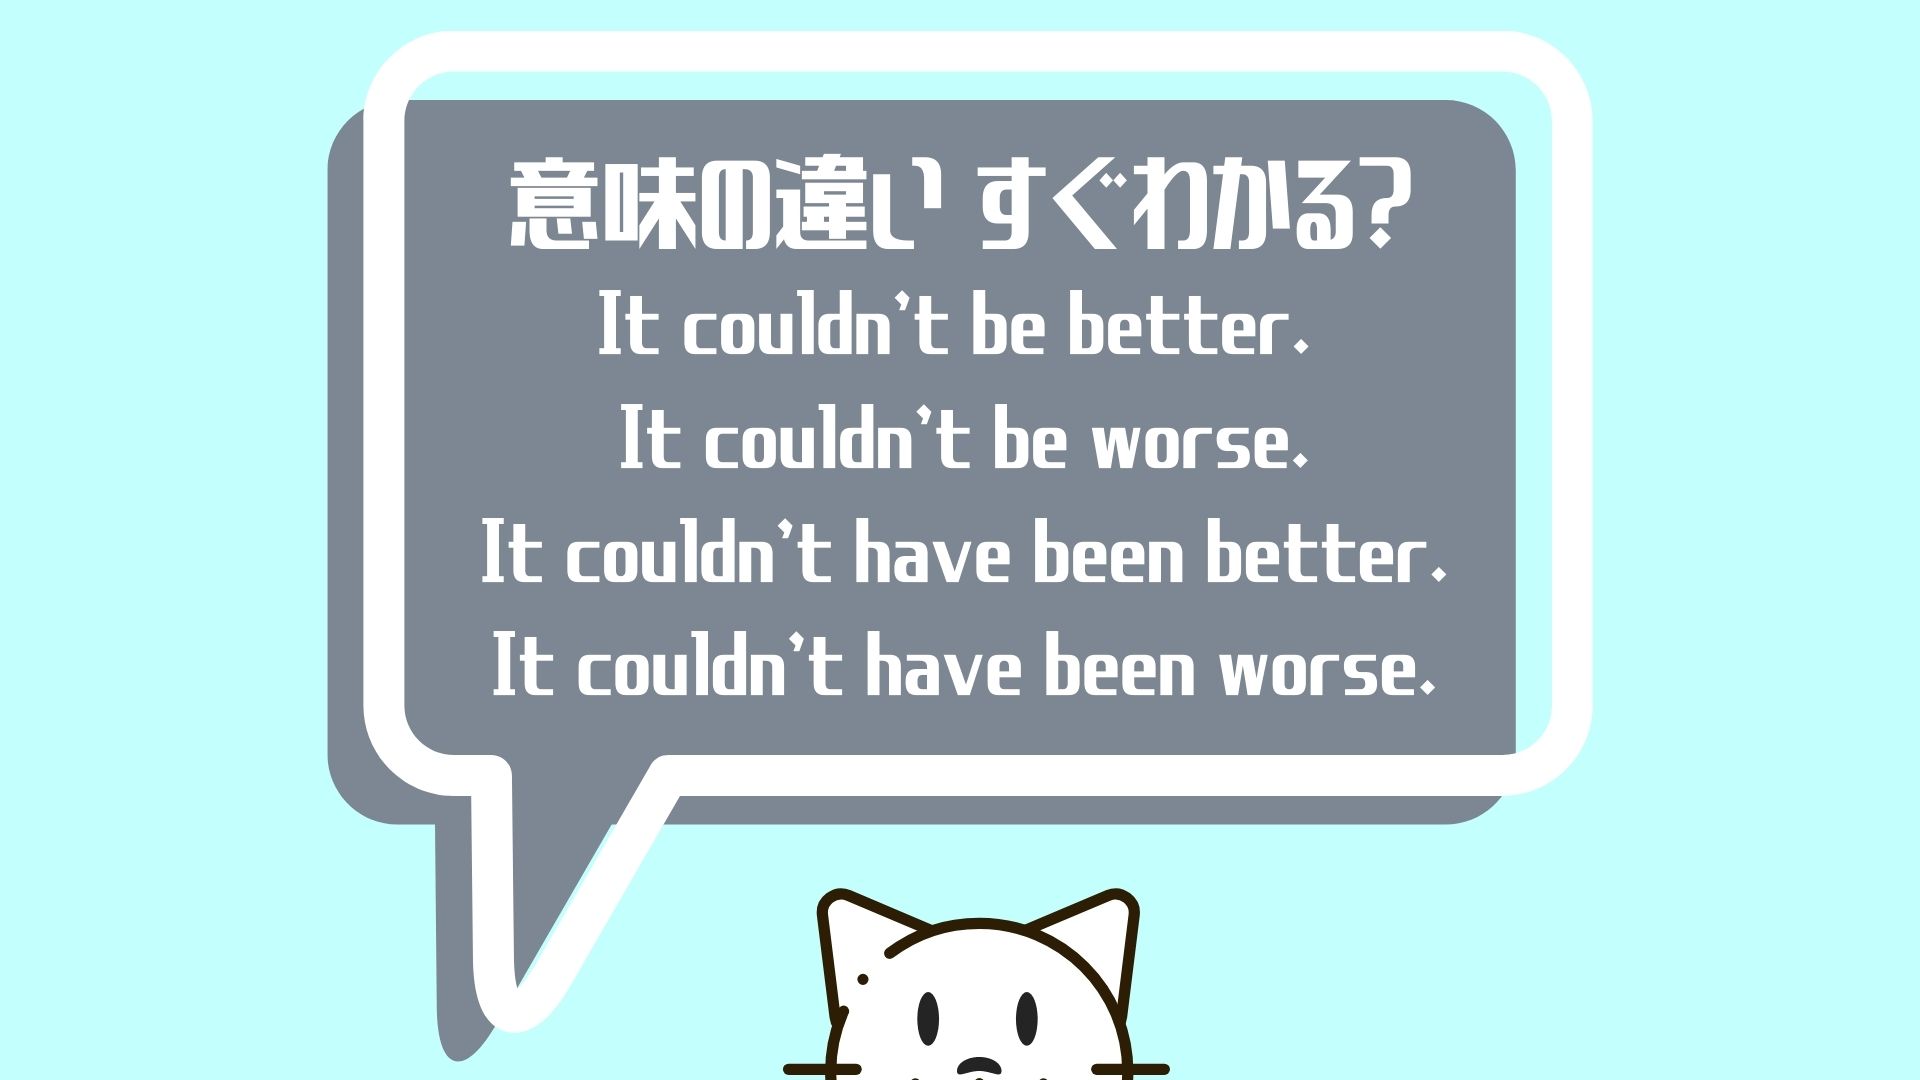 It couldn't be better. / It couldn't have been better. のイメージ、アイキャッチ画像。白猫。it could be worse, it could be betterも含む。